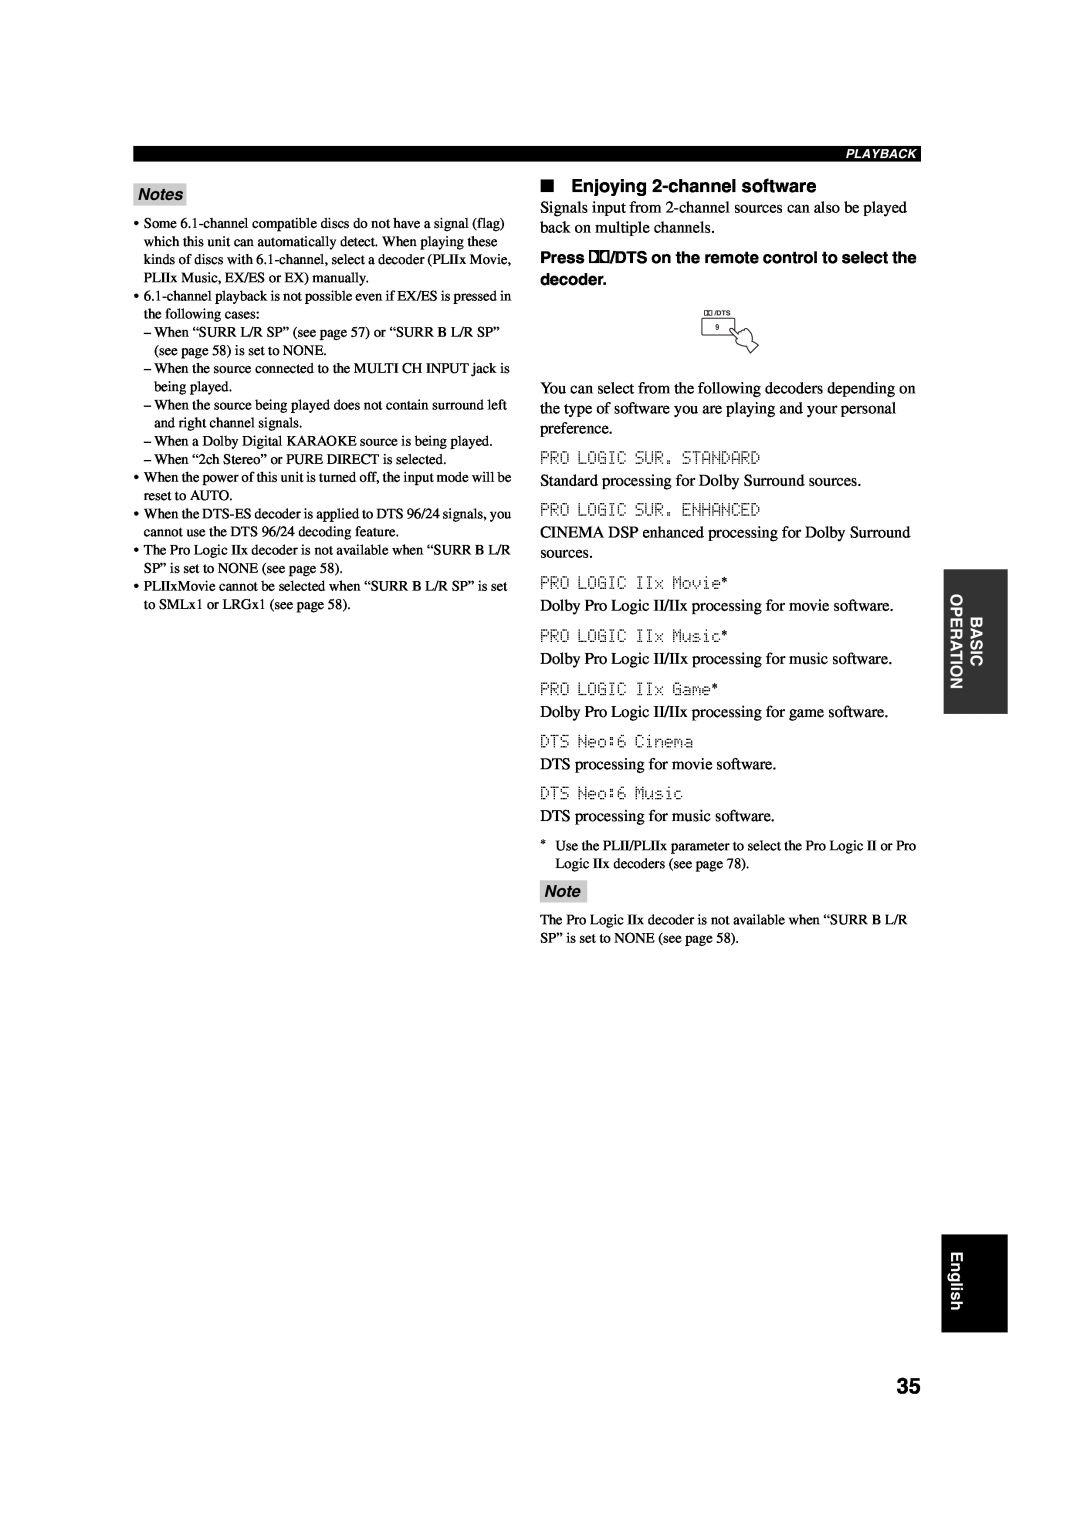 ION DSP-AX750SE, RX-V750 owner manual Enjoying 2-channelsoftware, Notes 